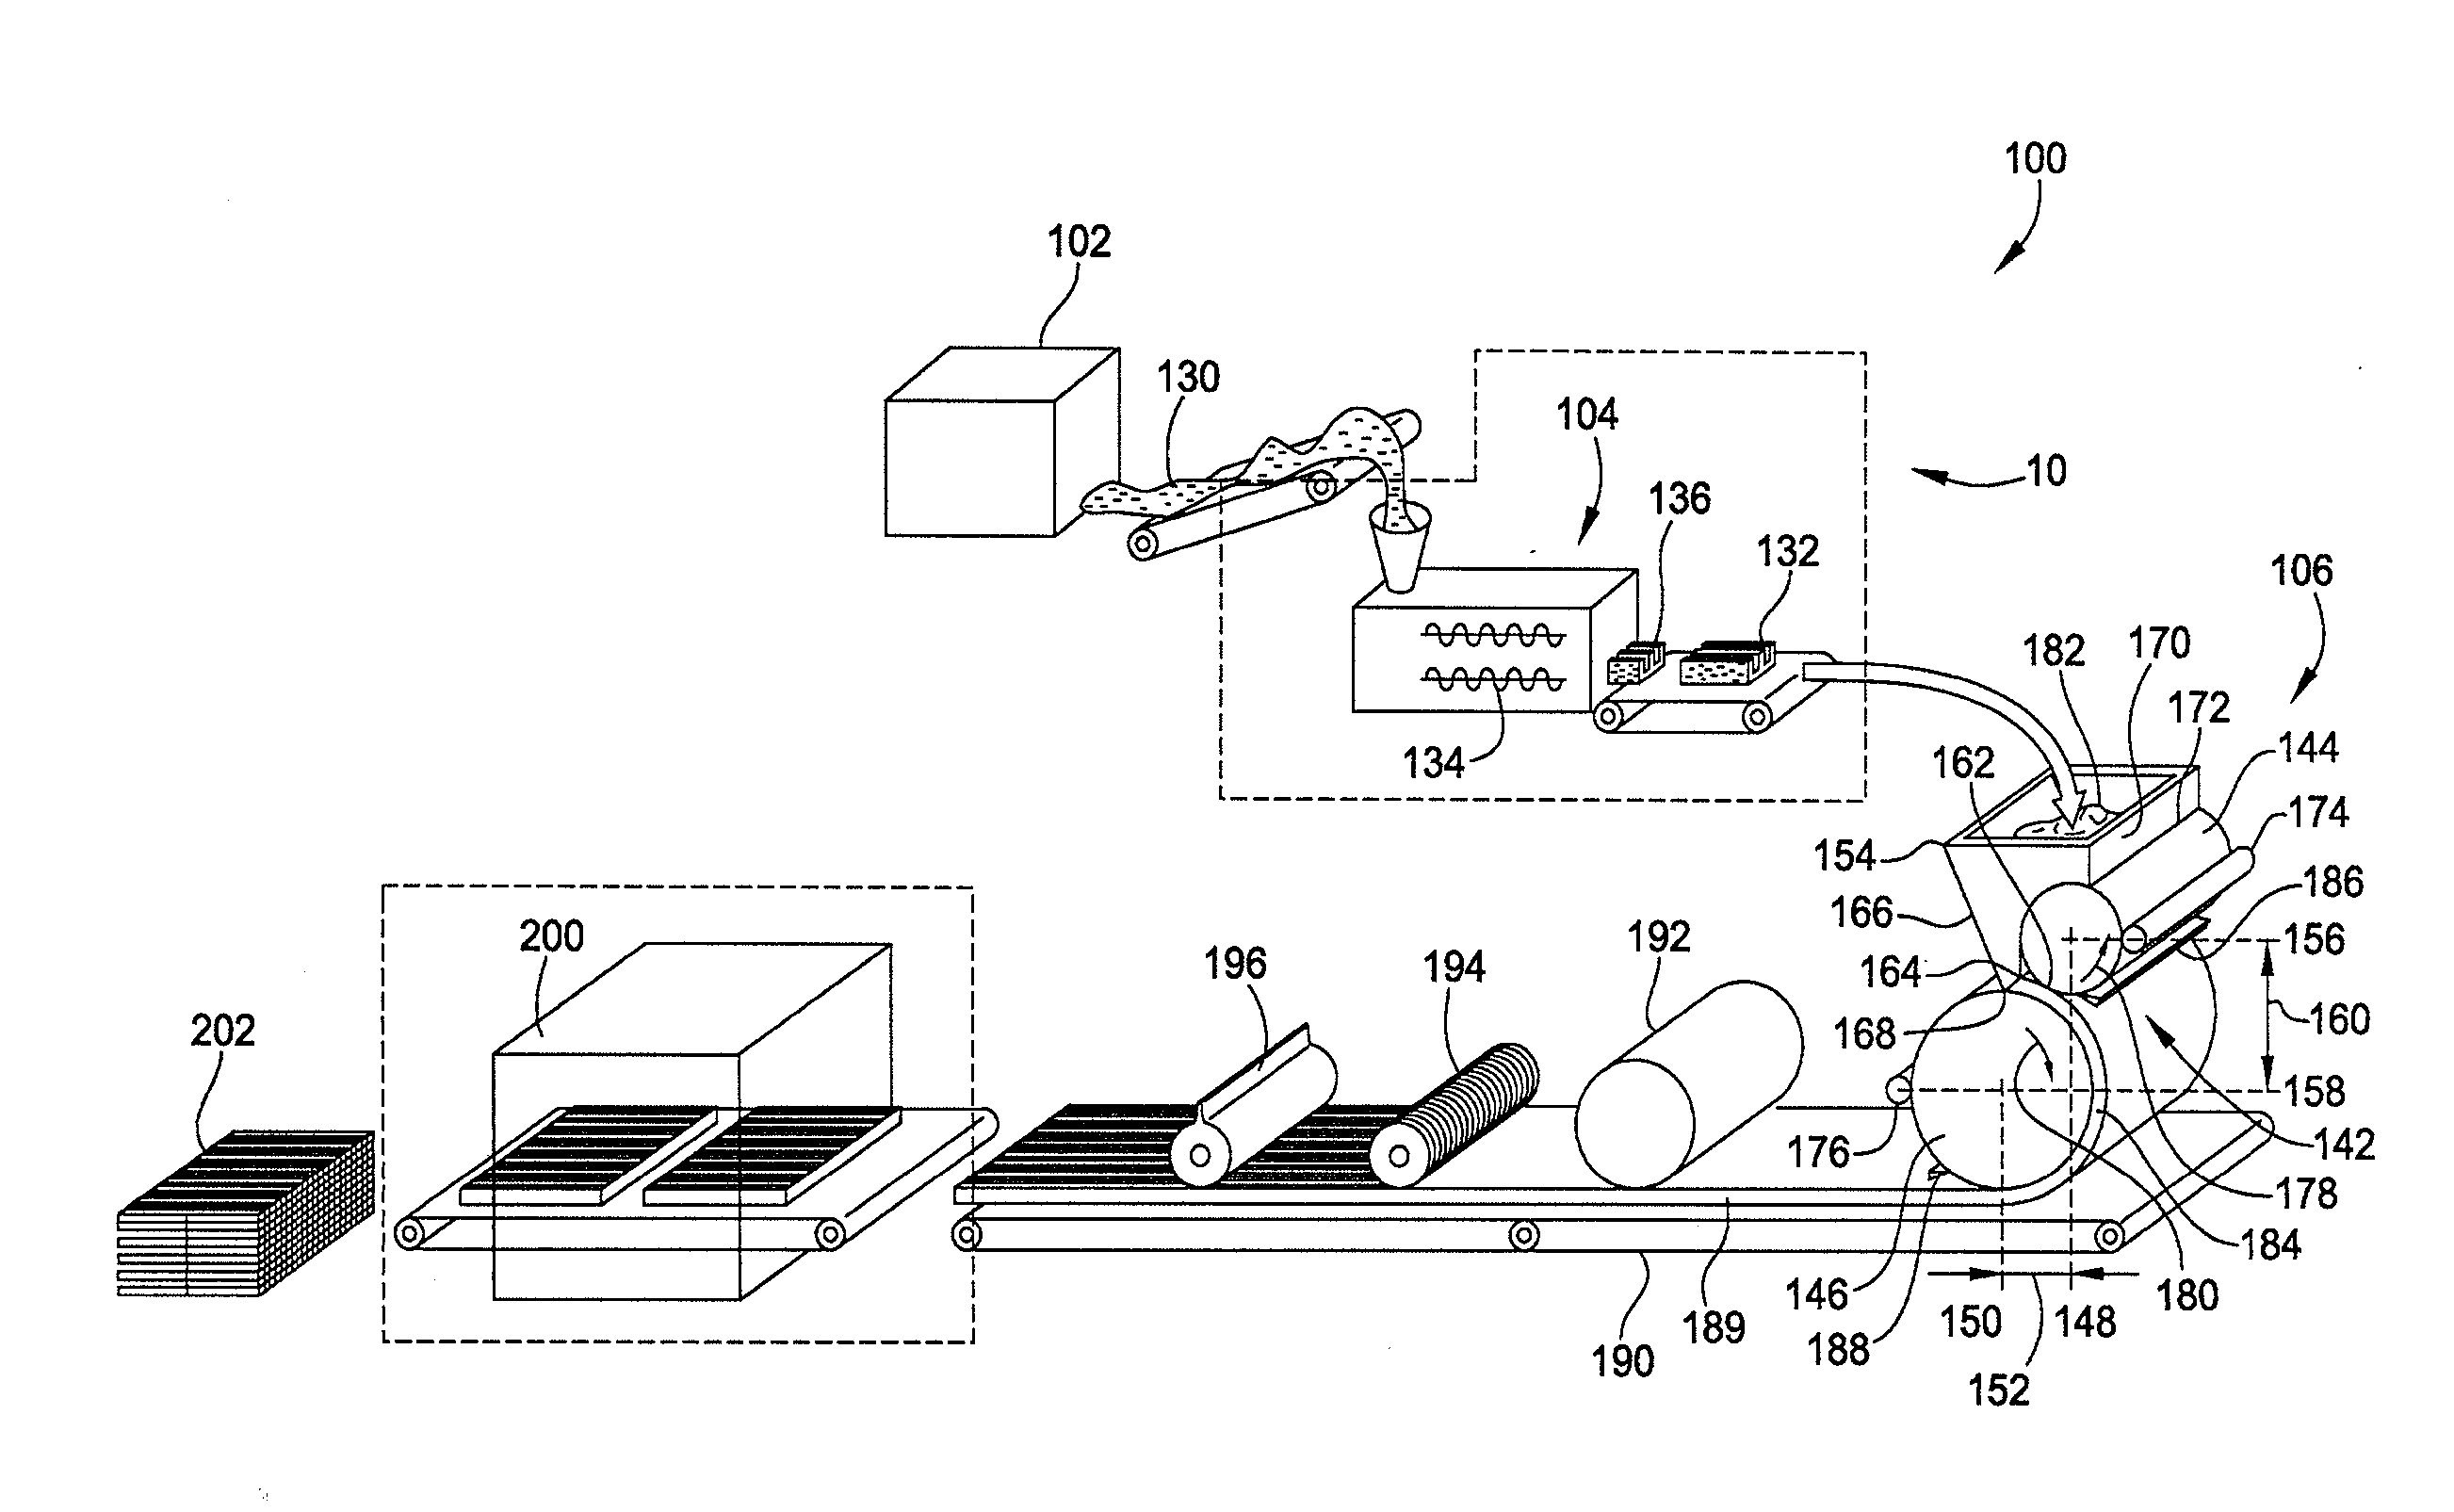 System and method of forming and sizing chewing gum and/or altering temperature of chewing gum